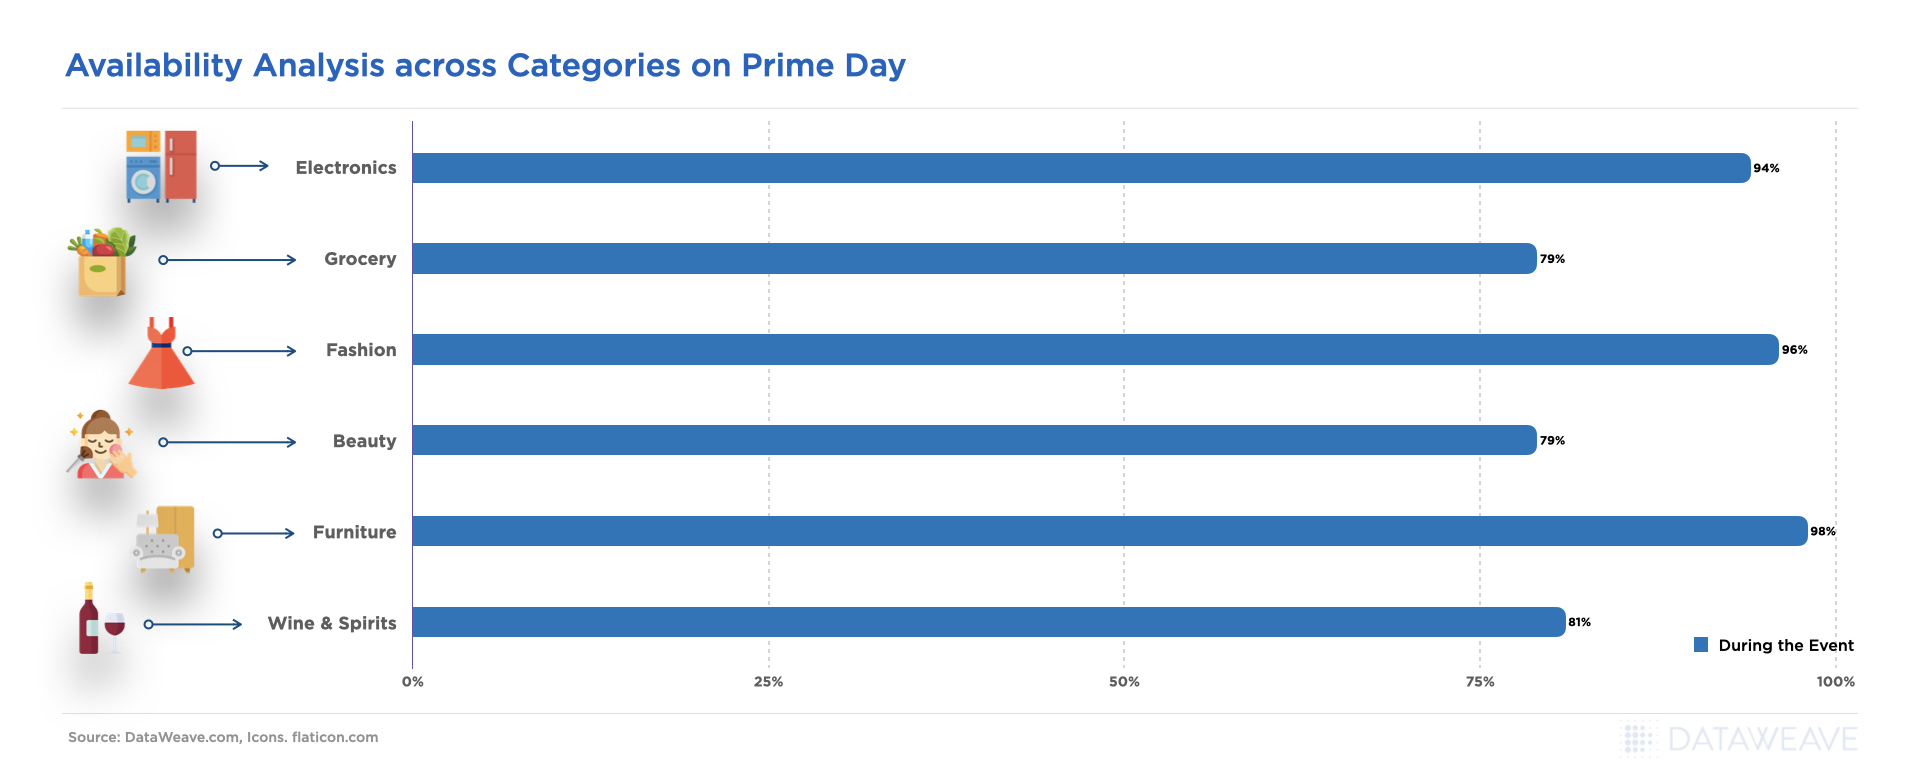 Availability Analysis across Categories on Prime Day